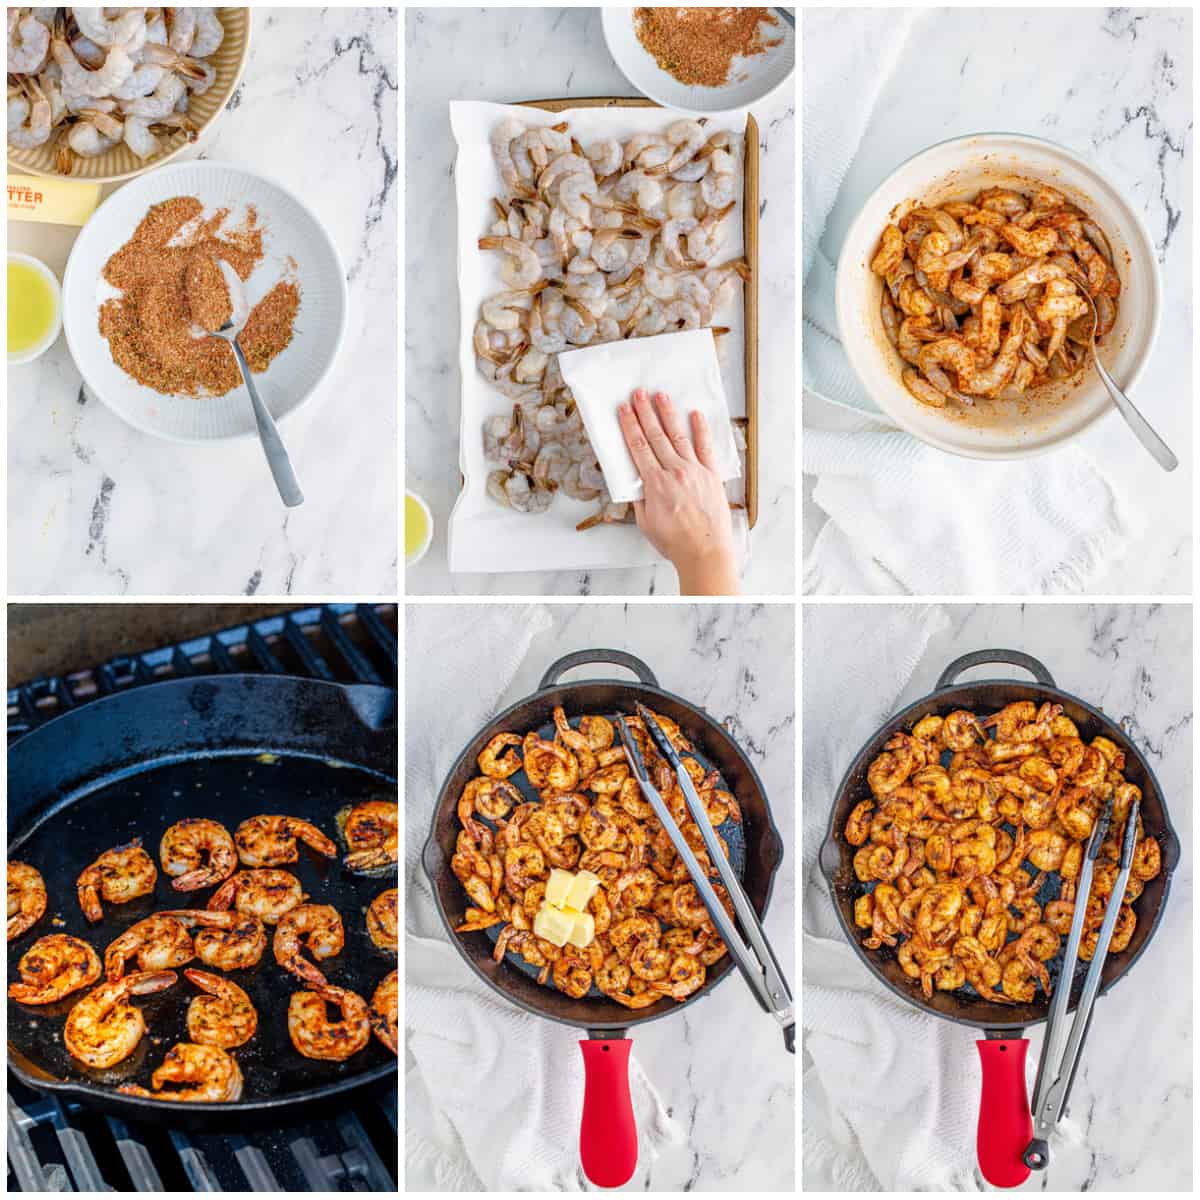 Step by step photos on how to make Blackened Shrimp.